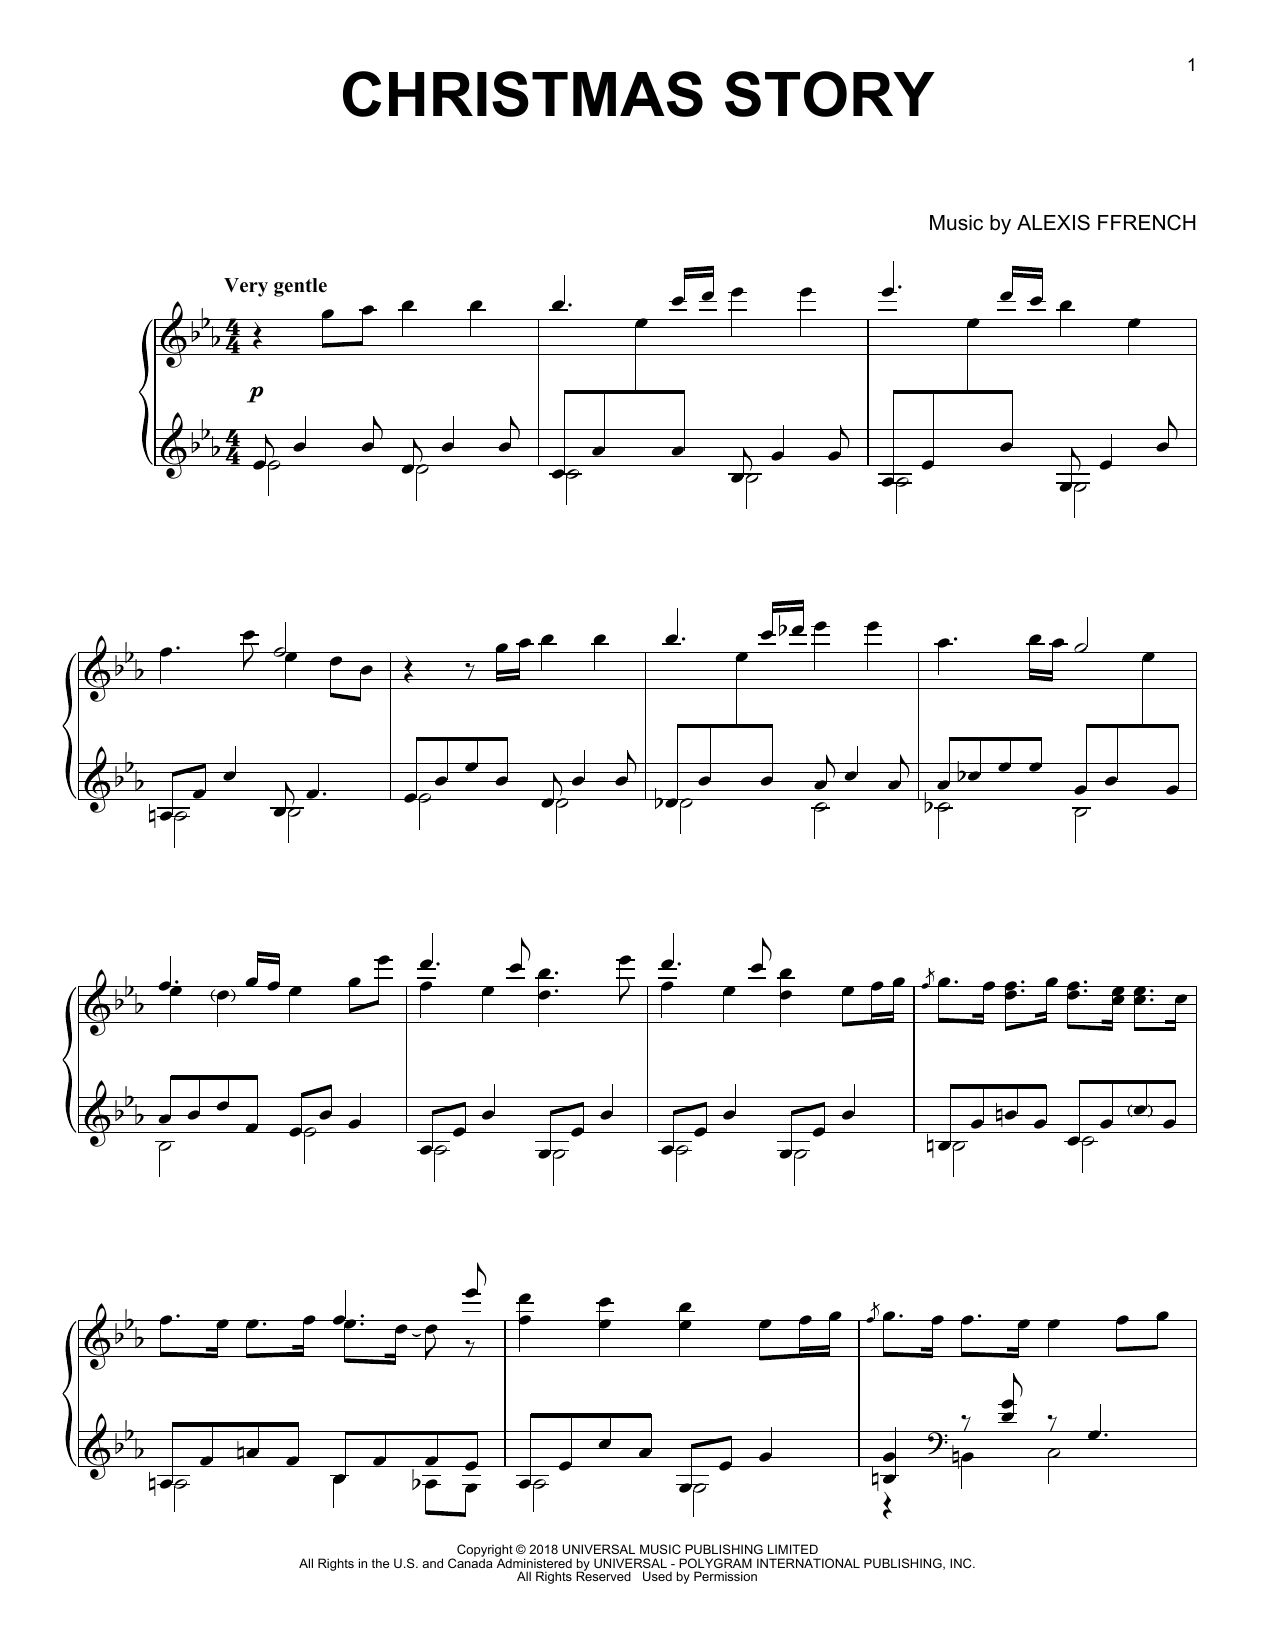 Download Alexis Ffrench Christmas Story Sheet Music